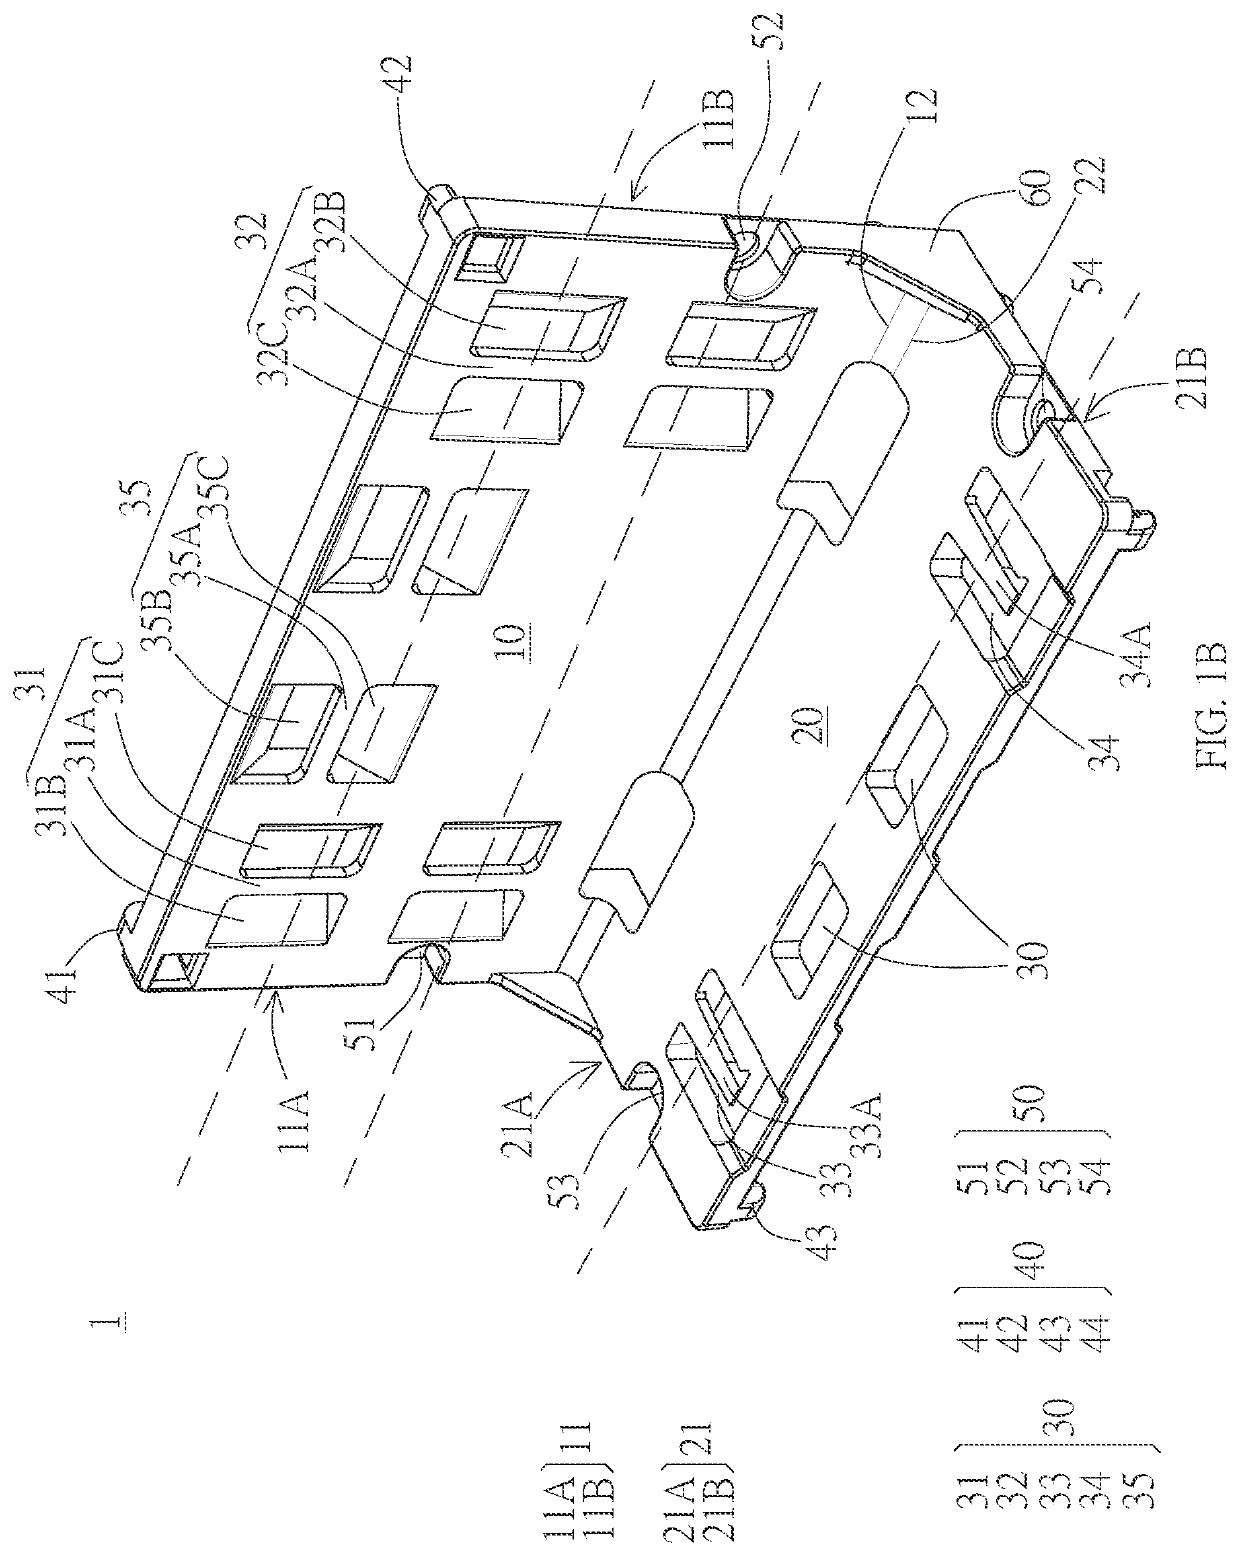 Package tray and case module including the package tray